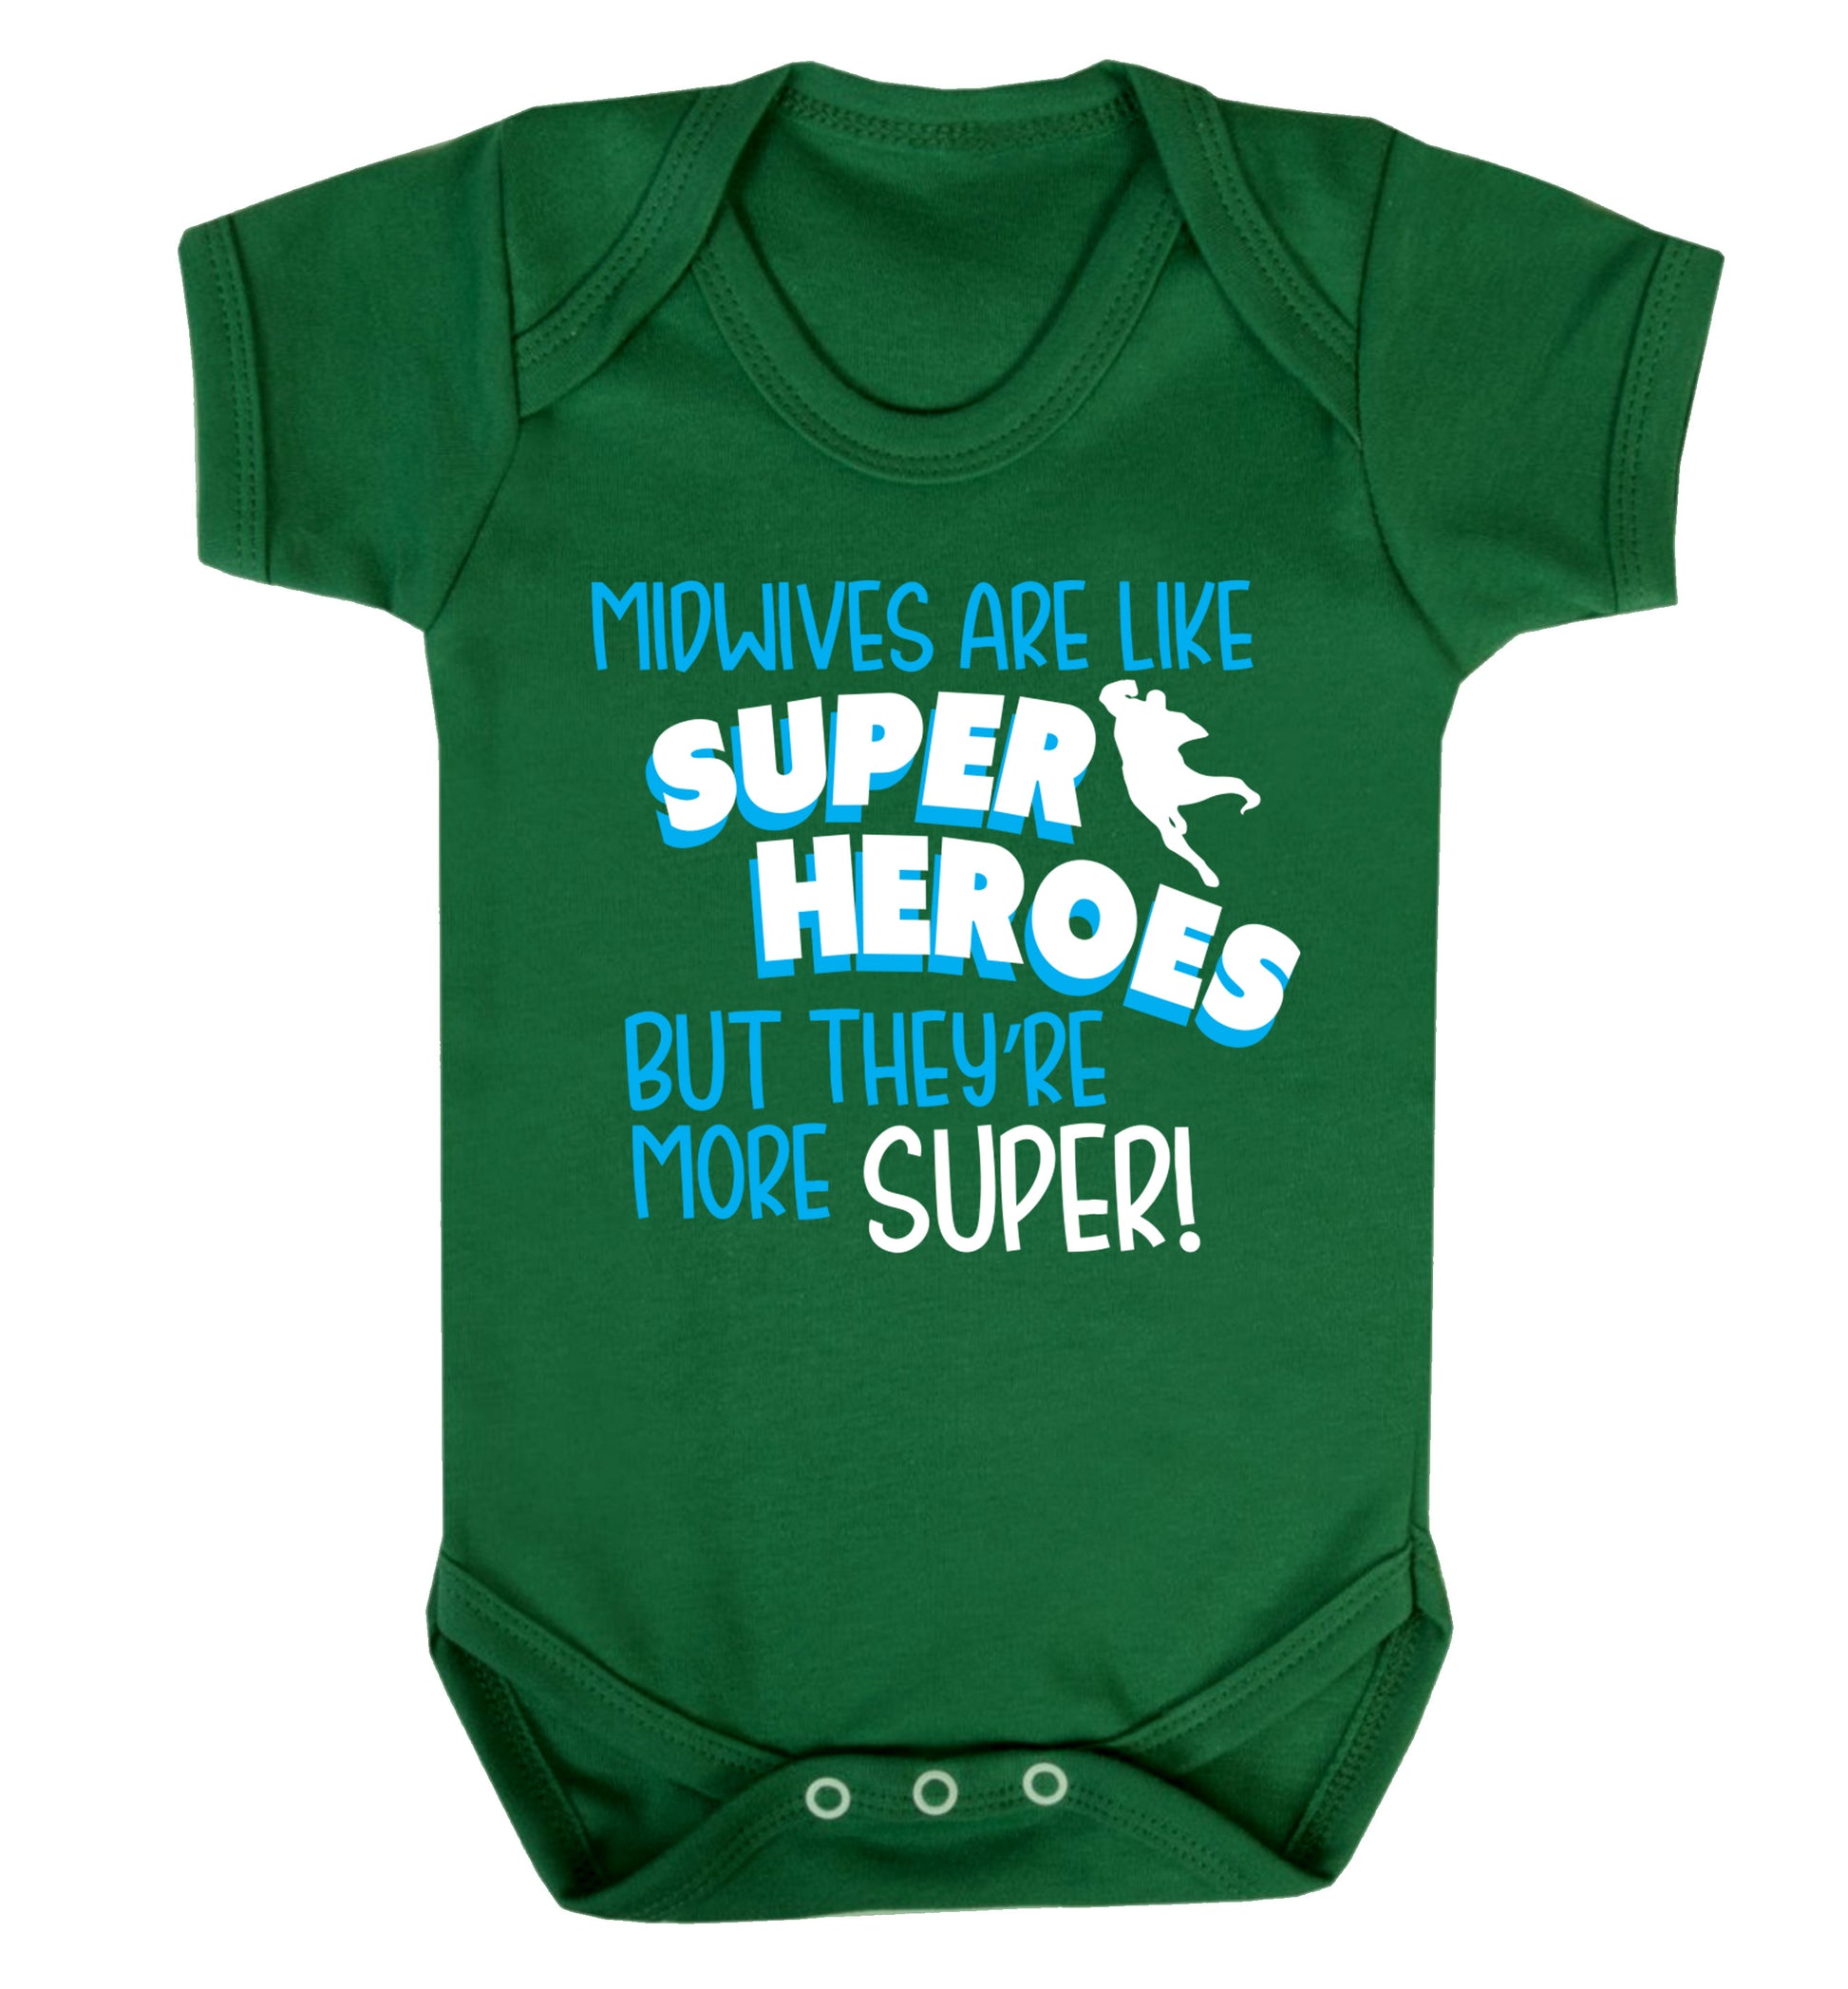 Midwives are like superheros but they're more super Baby Vest green 18-24 months